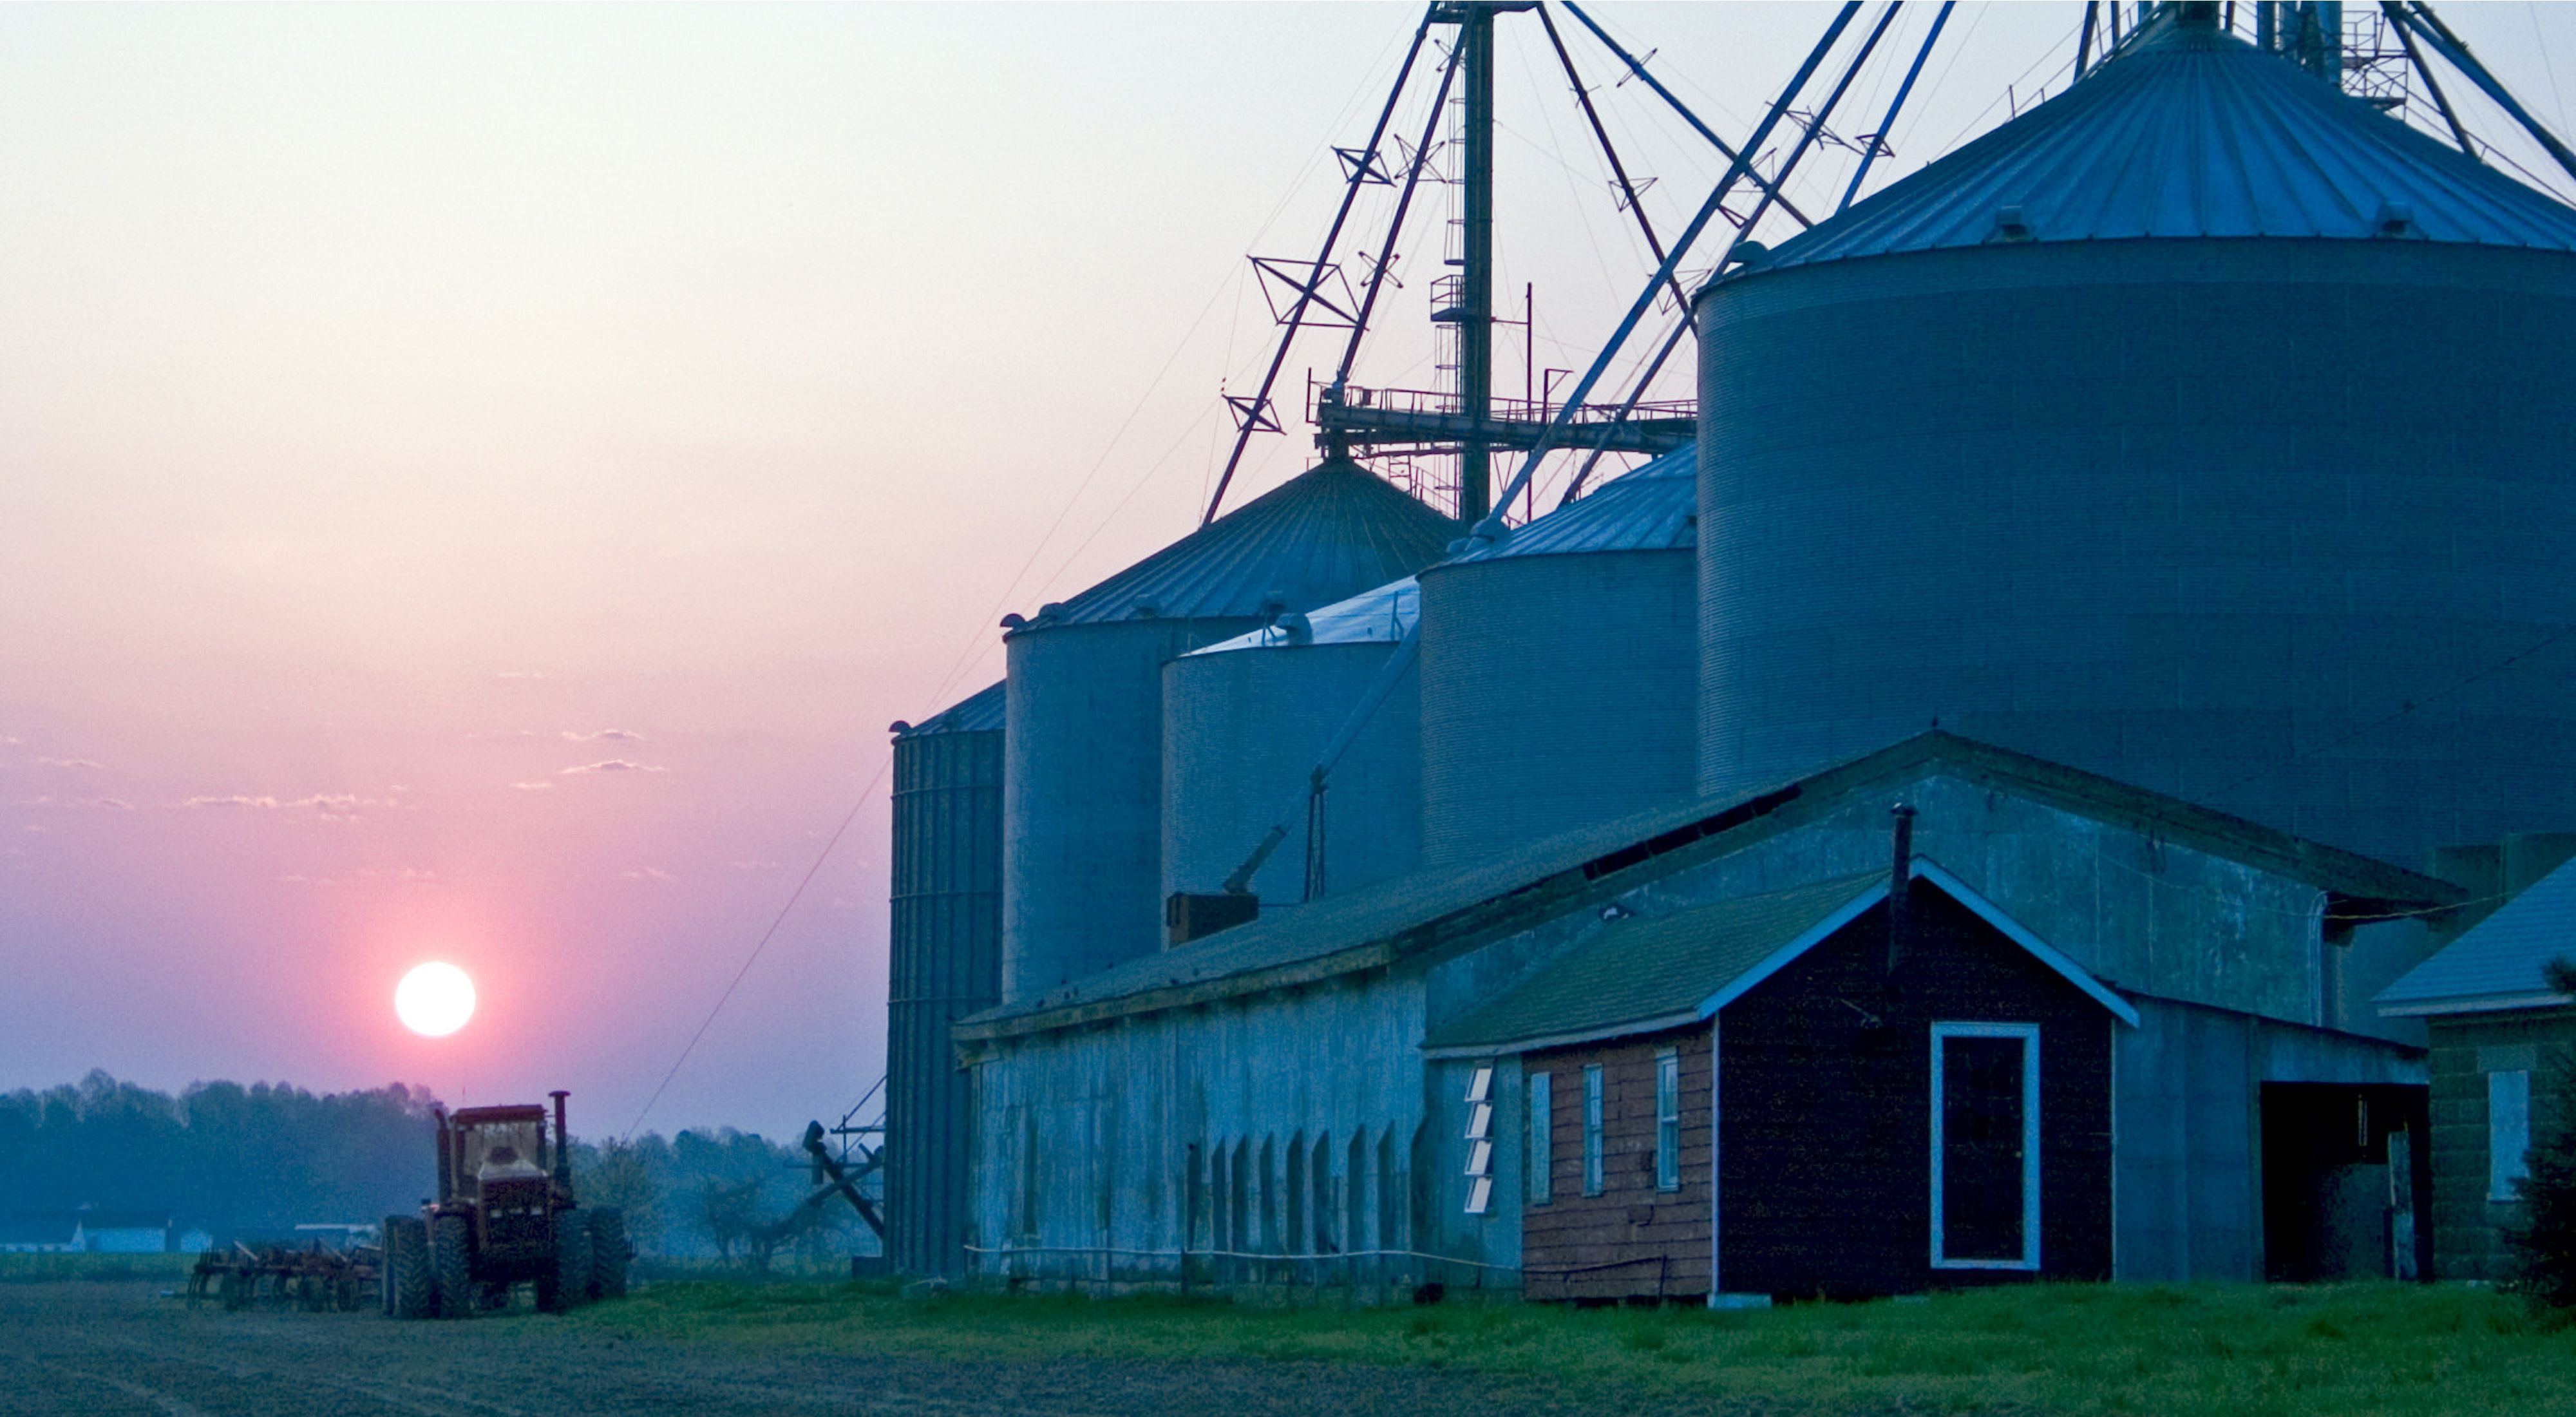 The sun rises over a farm in Maryland. A tractor drives past several low outbuildings flanked by five towering silos.